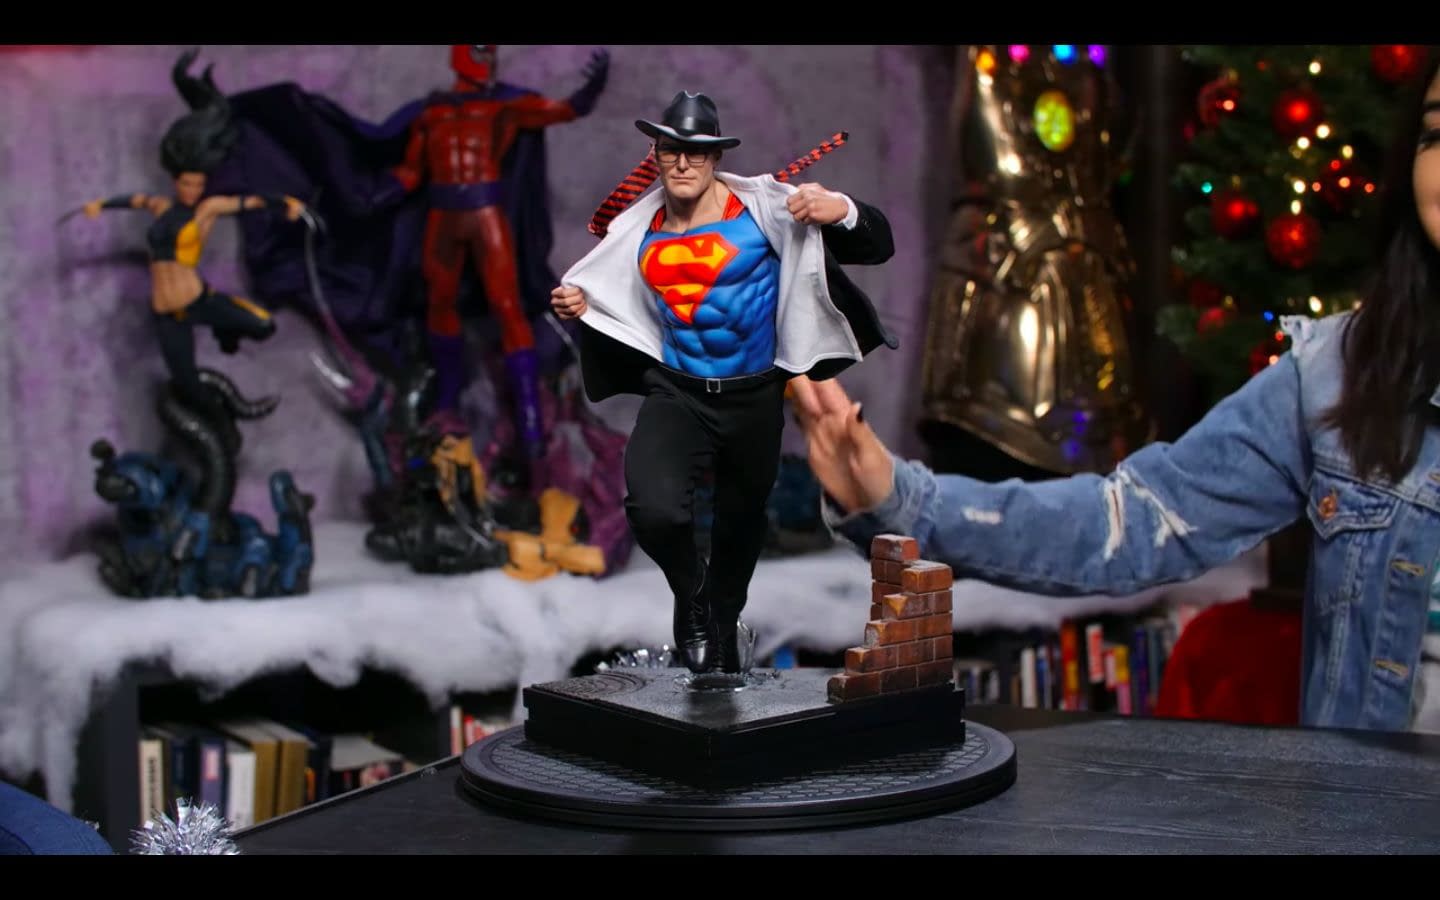 Superman Jumps into Action with Sideshow Collectibles [First Look]